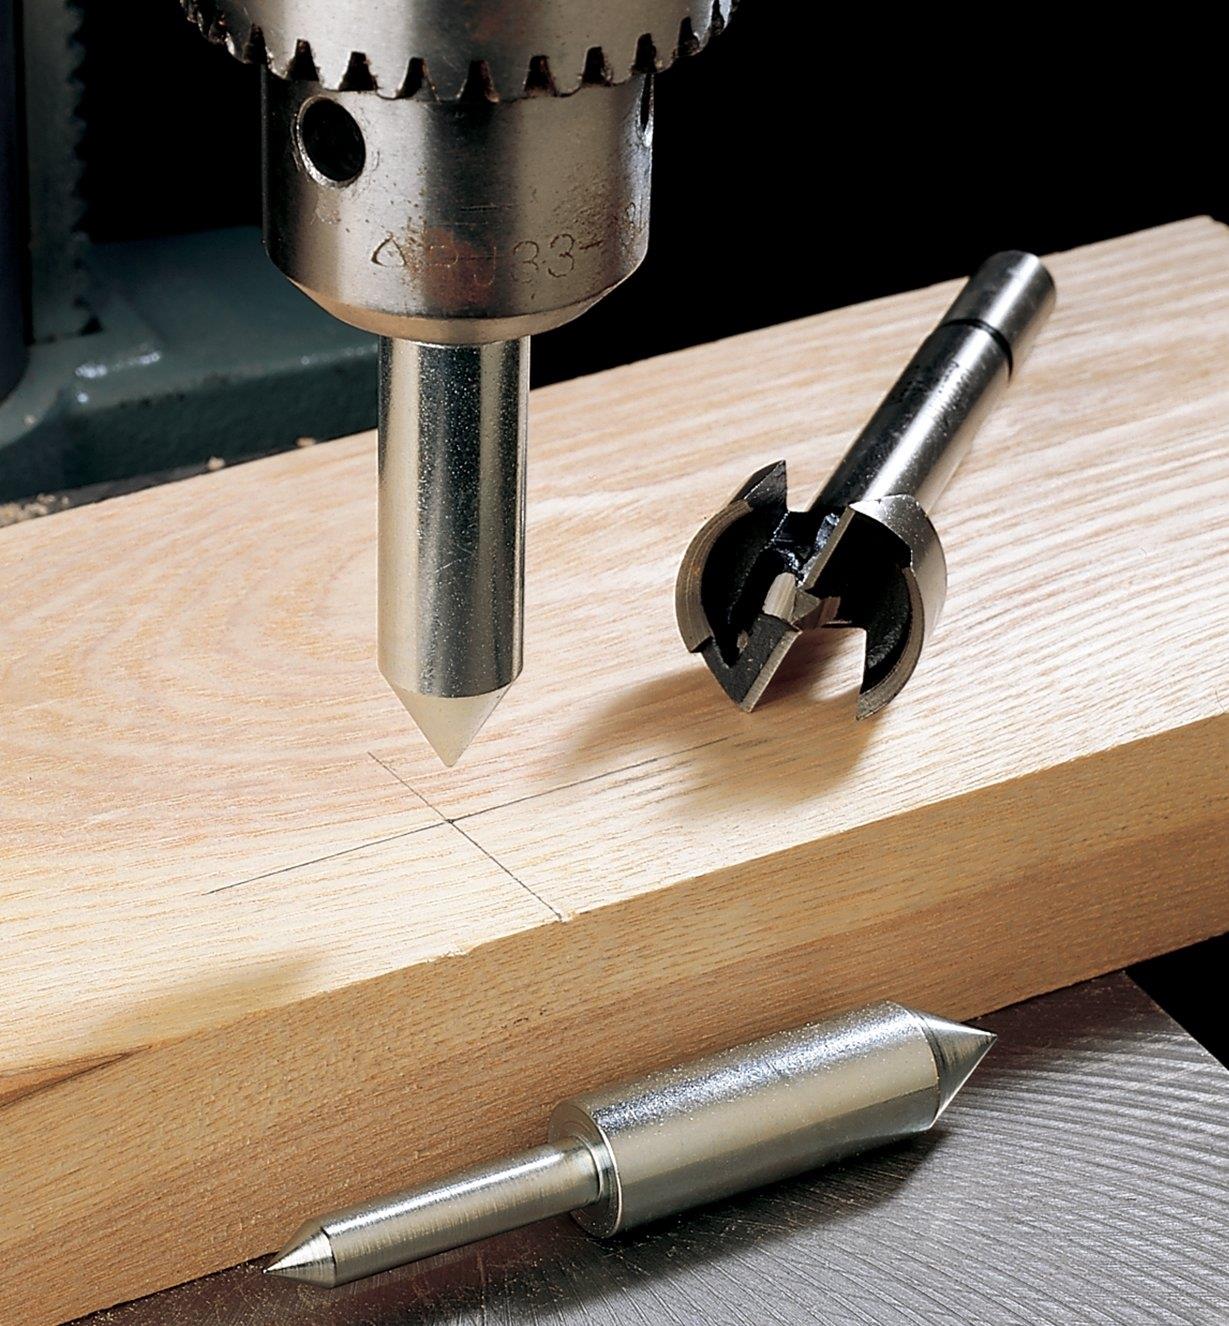 Center-Finding Pin chucked in a drill press for marking a point on a board